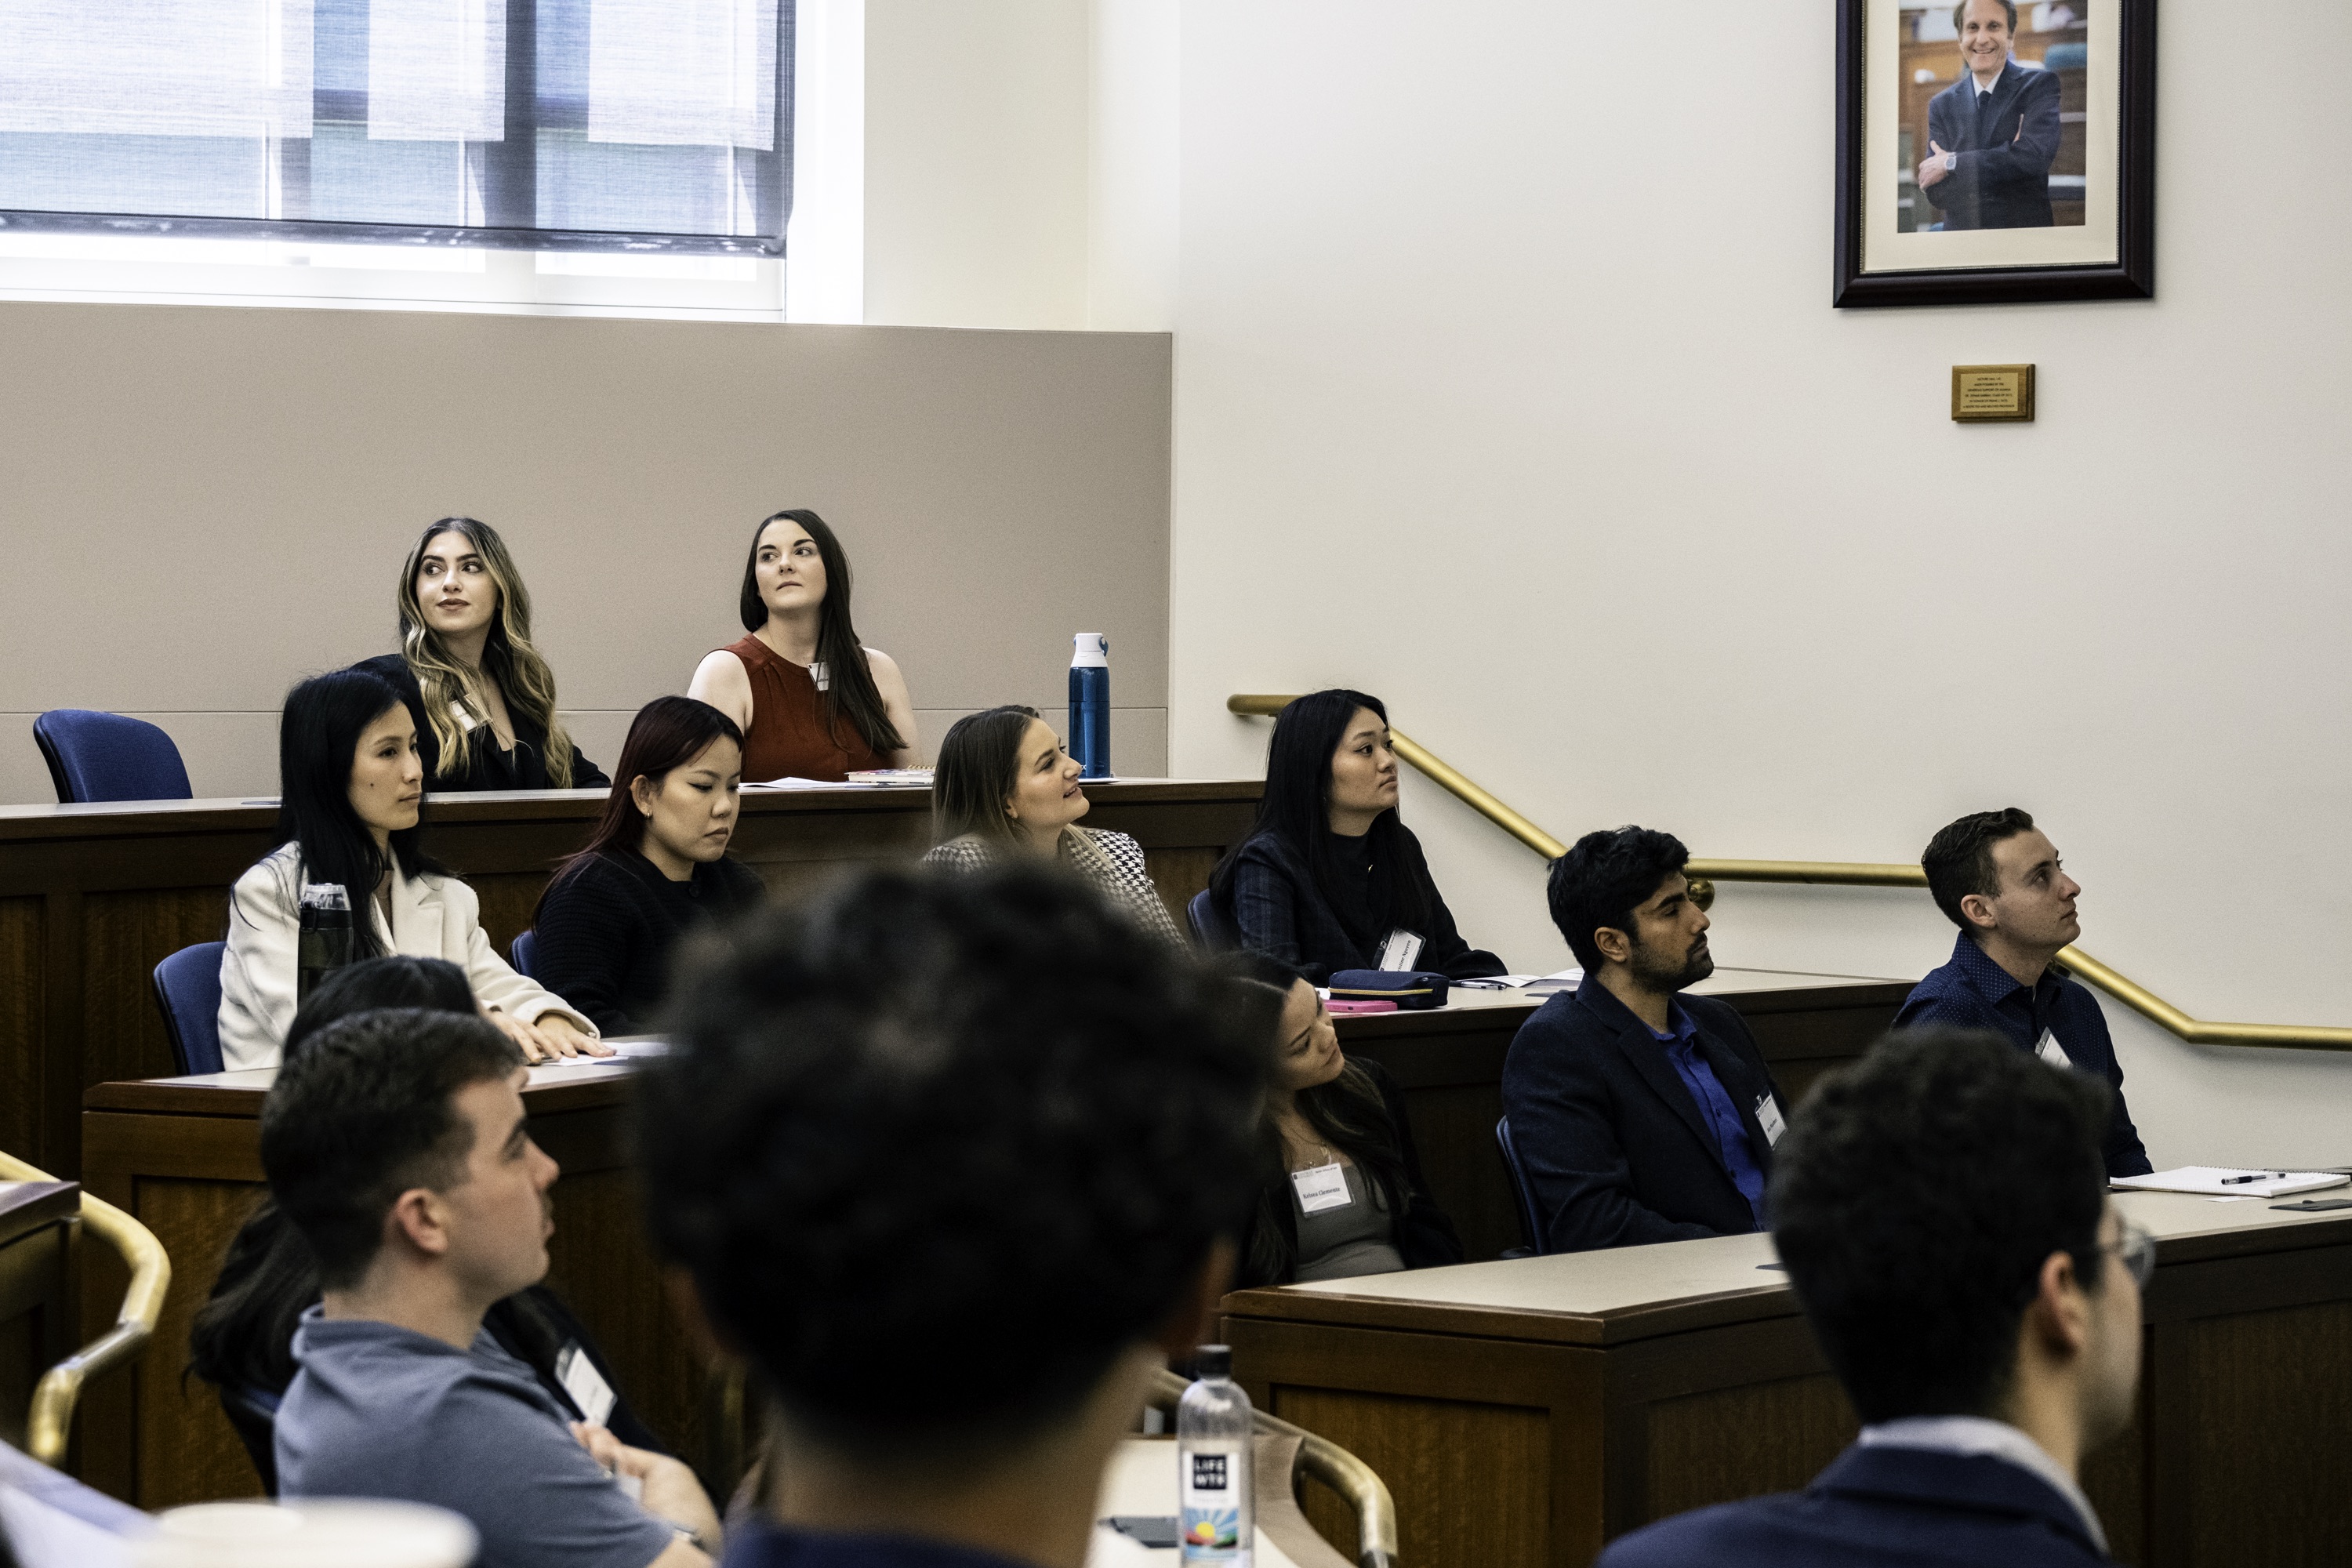 Photograph of prospective students in a mock law class during scholars weekend